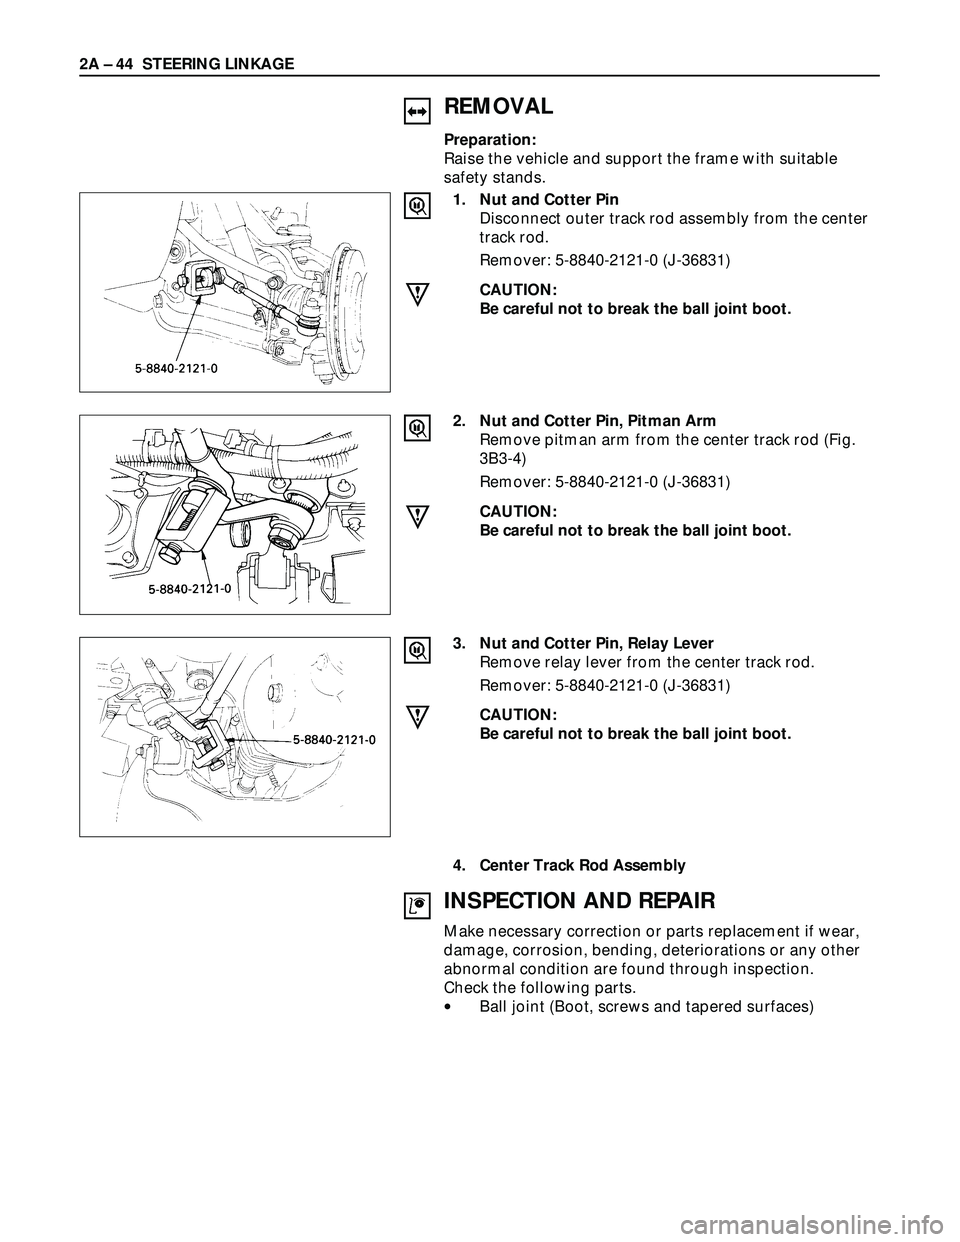 ISUZU TROOPER 1998  Service Repair Manual 2A – 44 STEERING LINKAGE
REMOVAL
Preparation:
Raise the vehicle and support the frame with suitable
safety stands.
1. Nut and Cotter Pin
Disconnect outer track rod assembly from the center
track rod